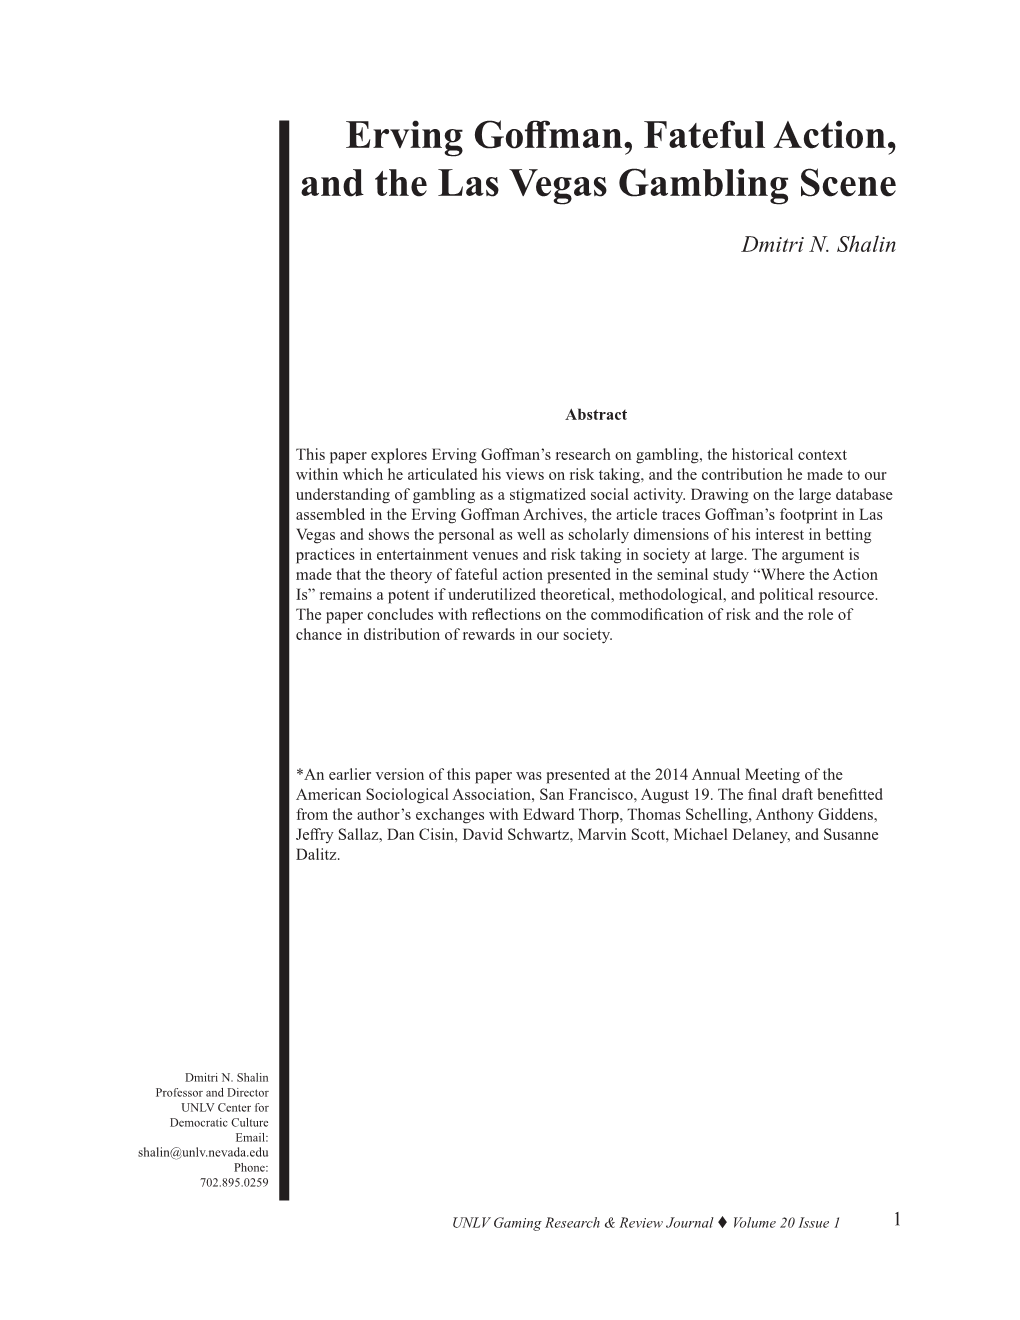 Erving Goffman, Fateful Action, and the Las Vegas Gambling Scene